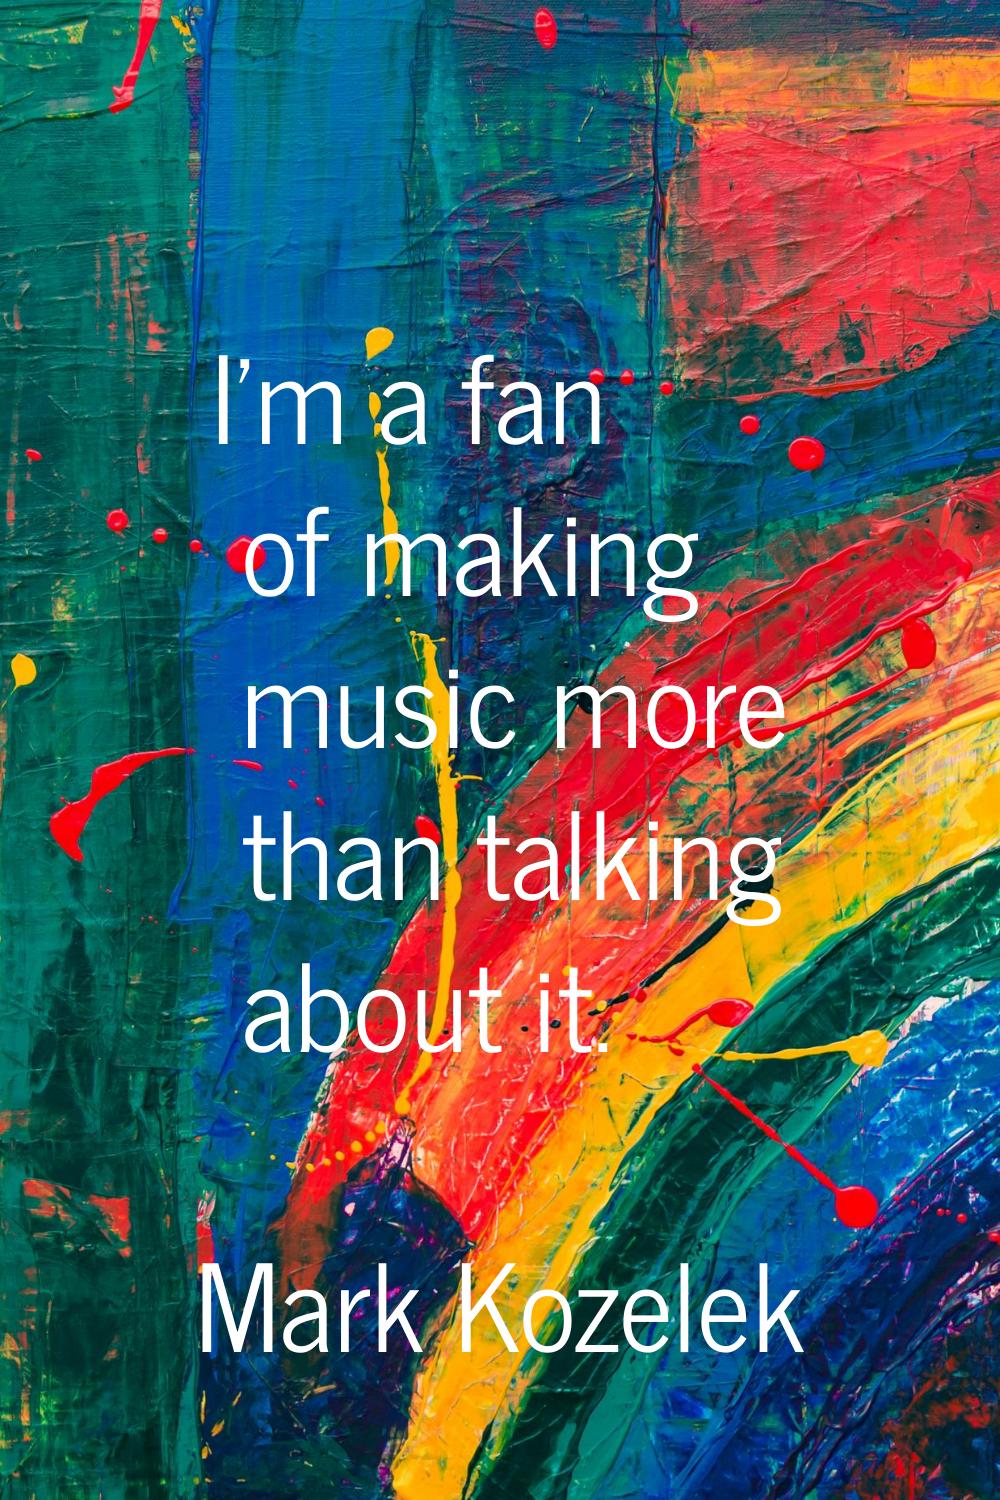 I'm a fan of making music more than talking about it.